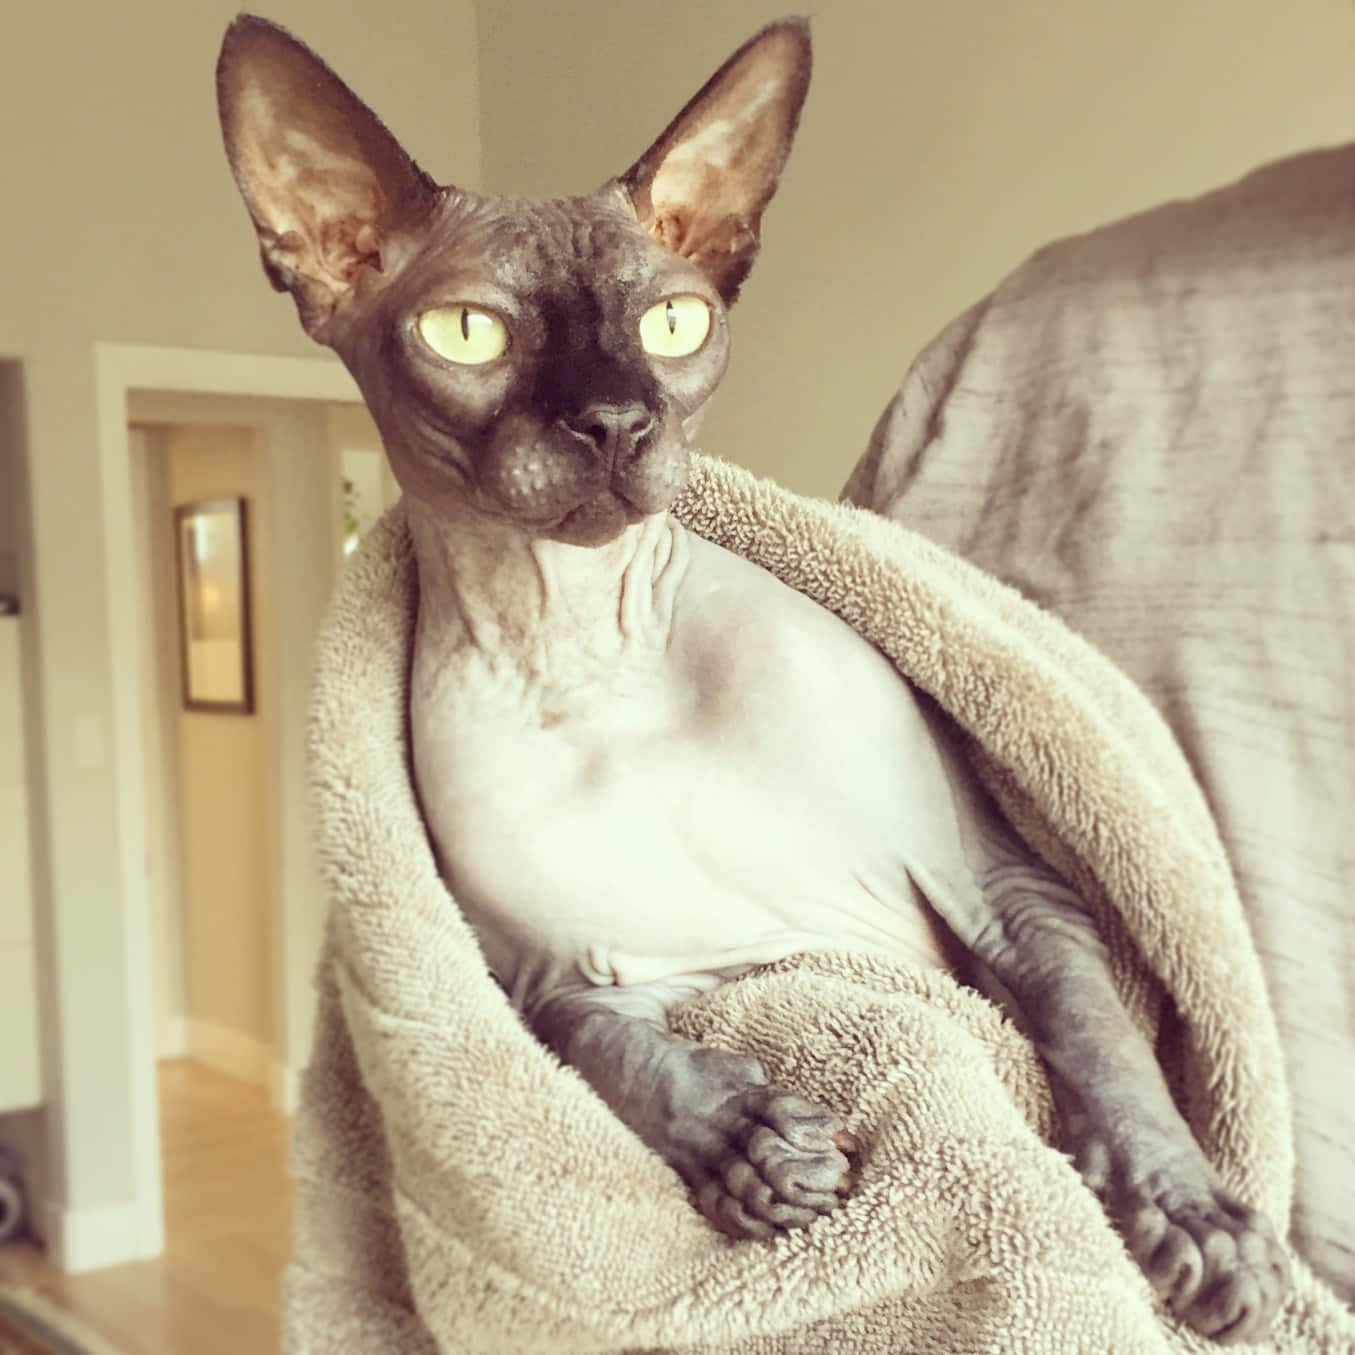 A Cat Is Being Held Up In A Towel